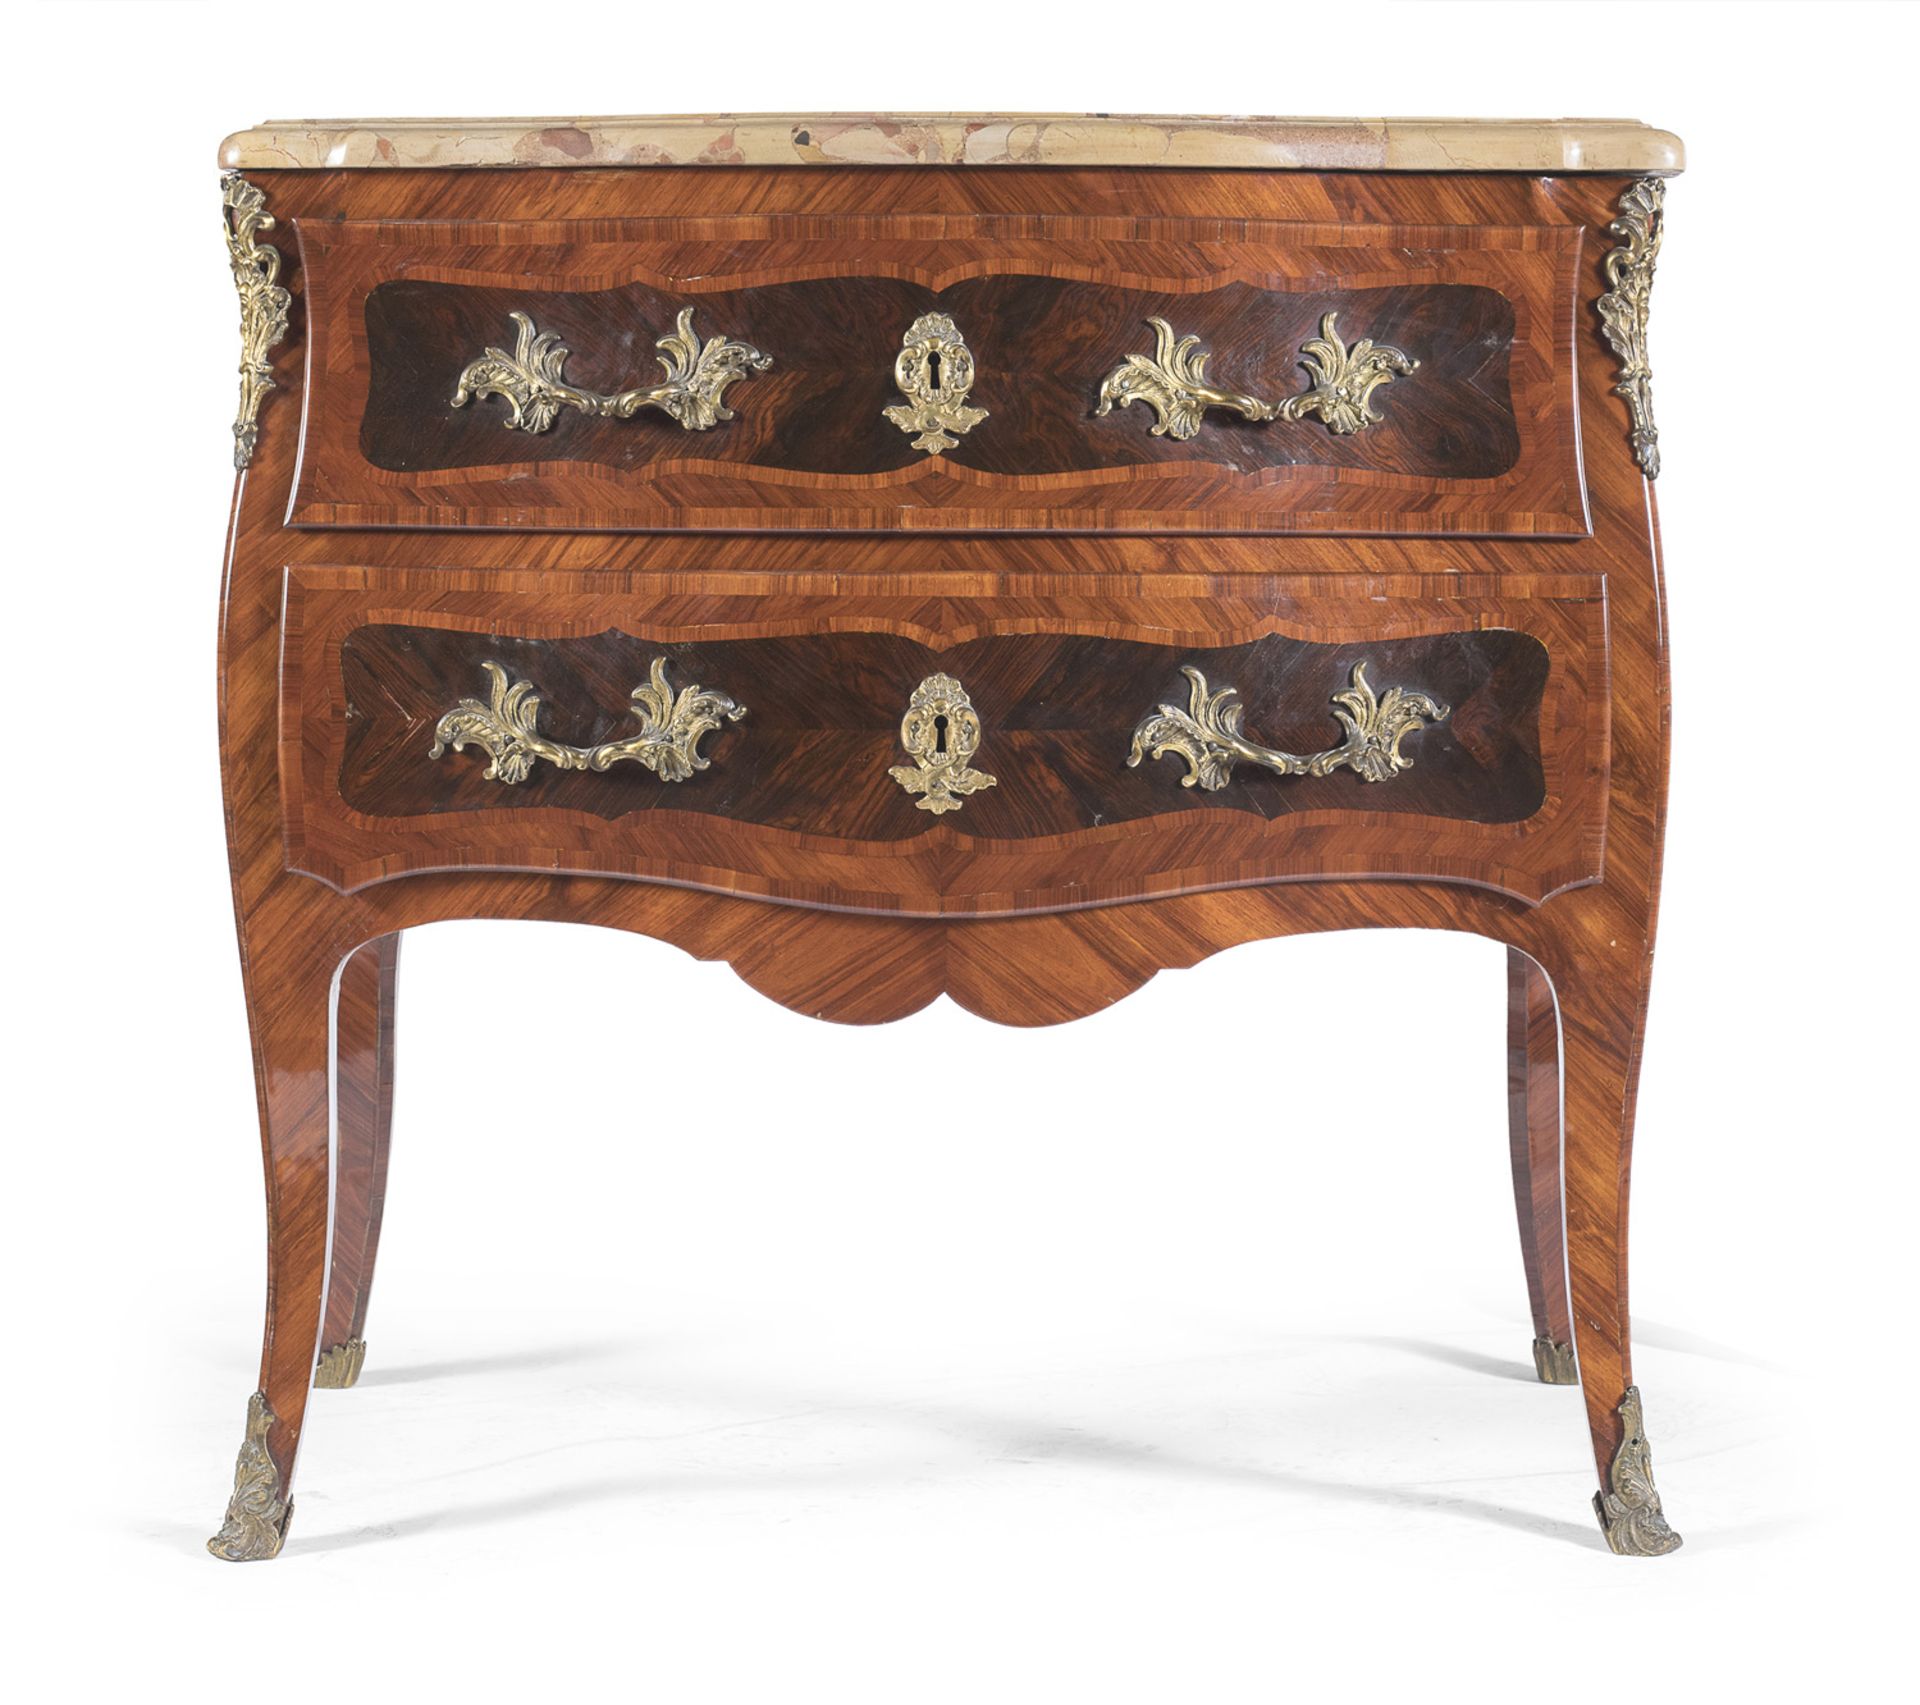 SMALL COMMODE FRANCE 18TH CENTURY - Image 2 of 2